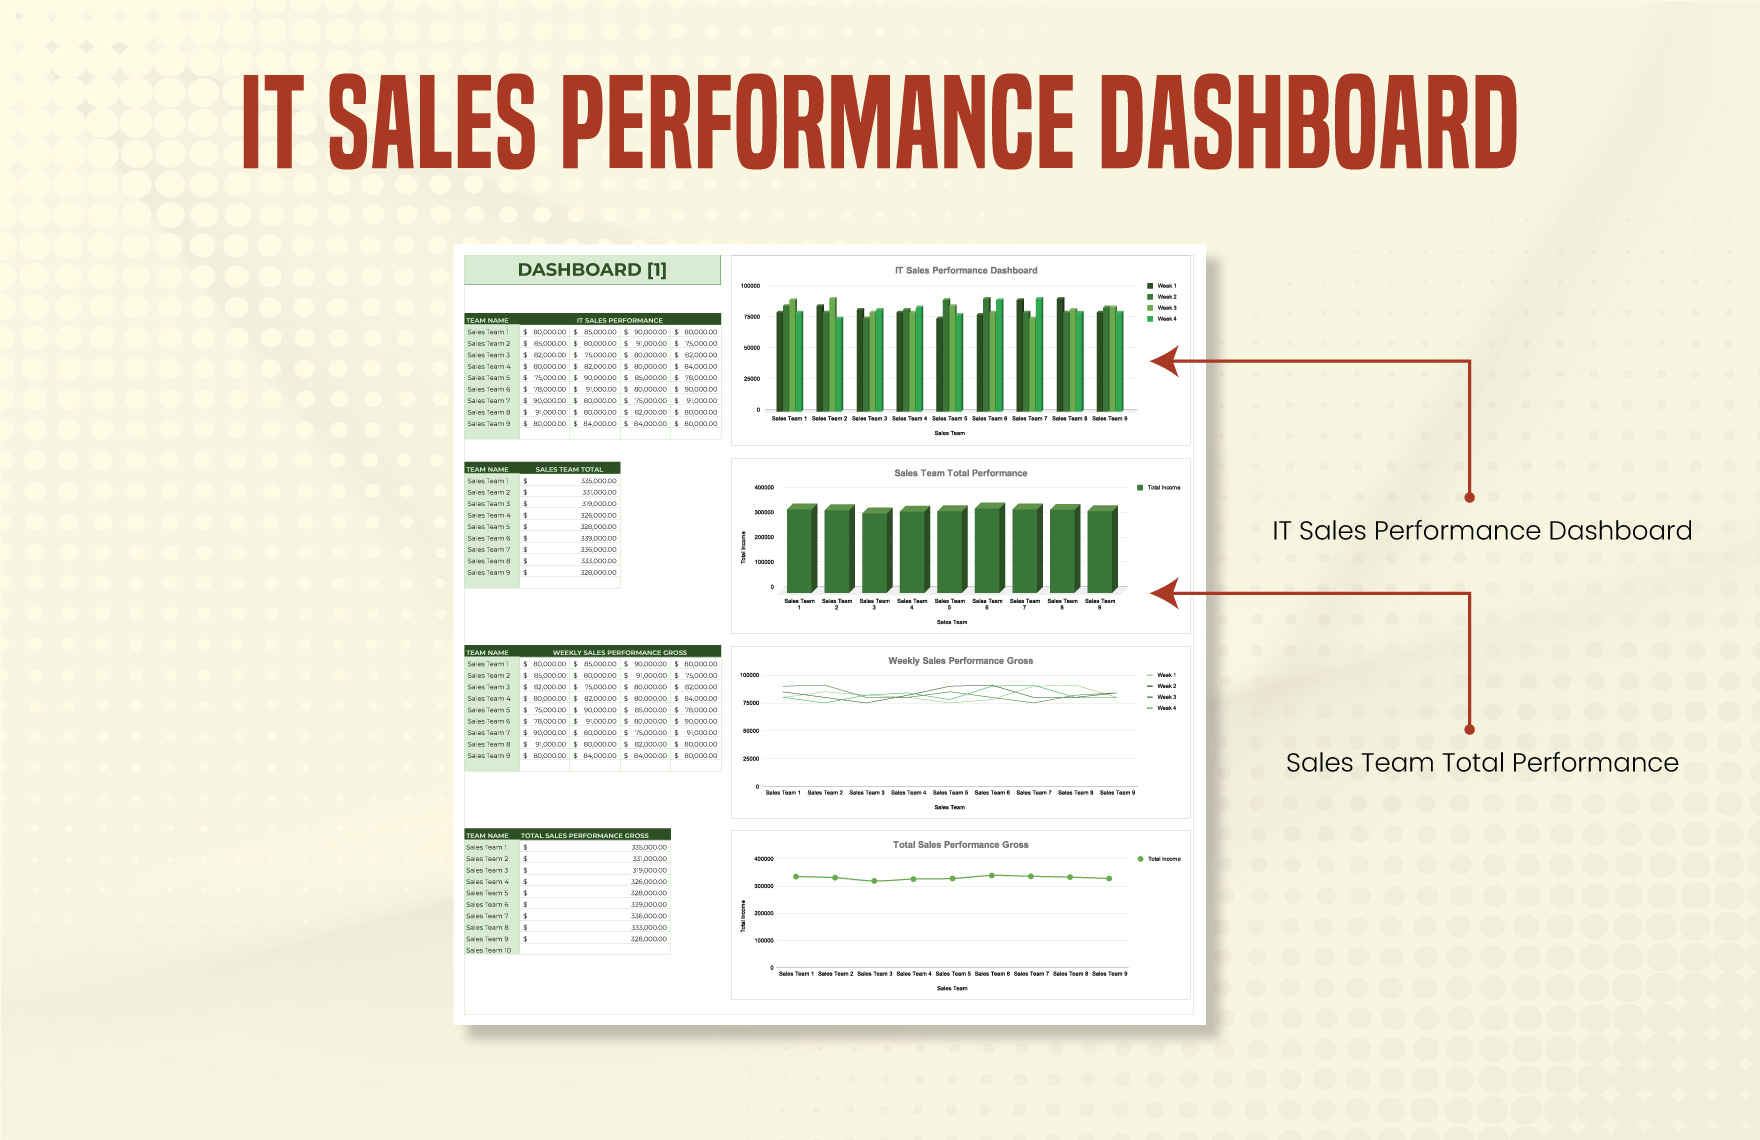 IT Sales Performance Dashboard Template